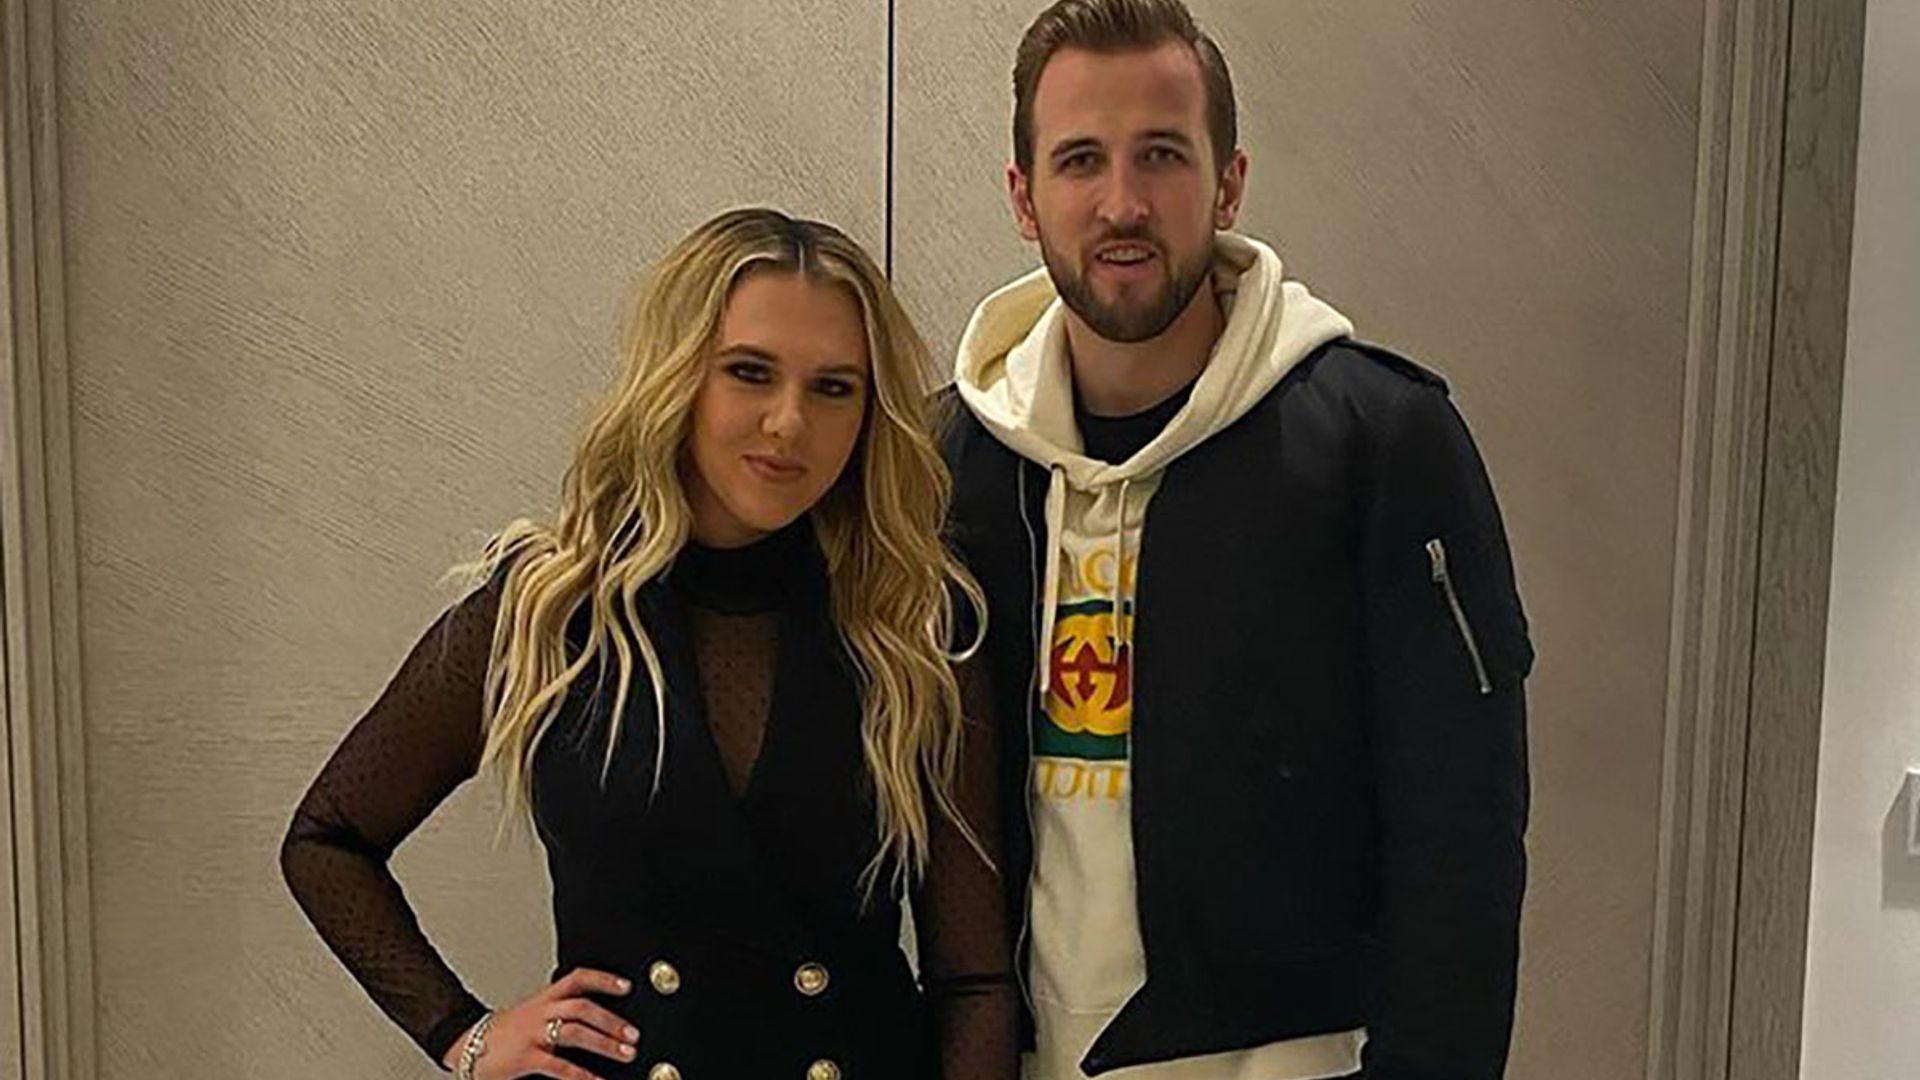 harry kane and wife